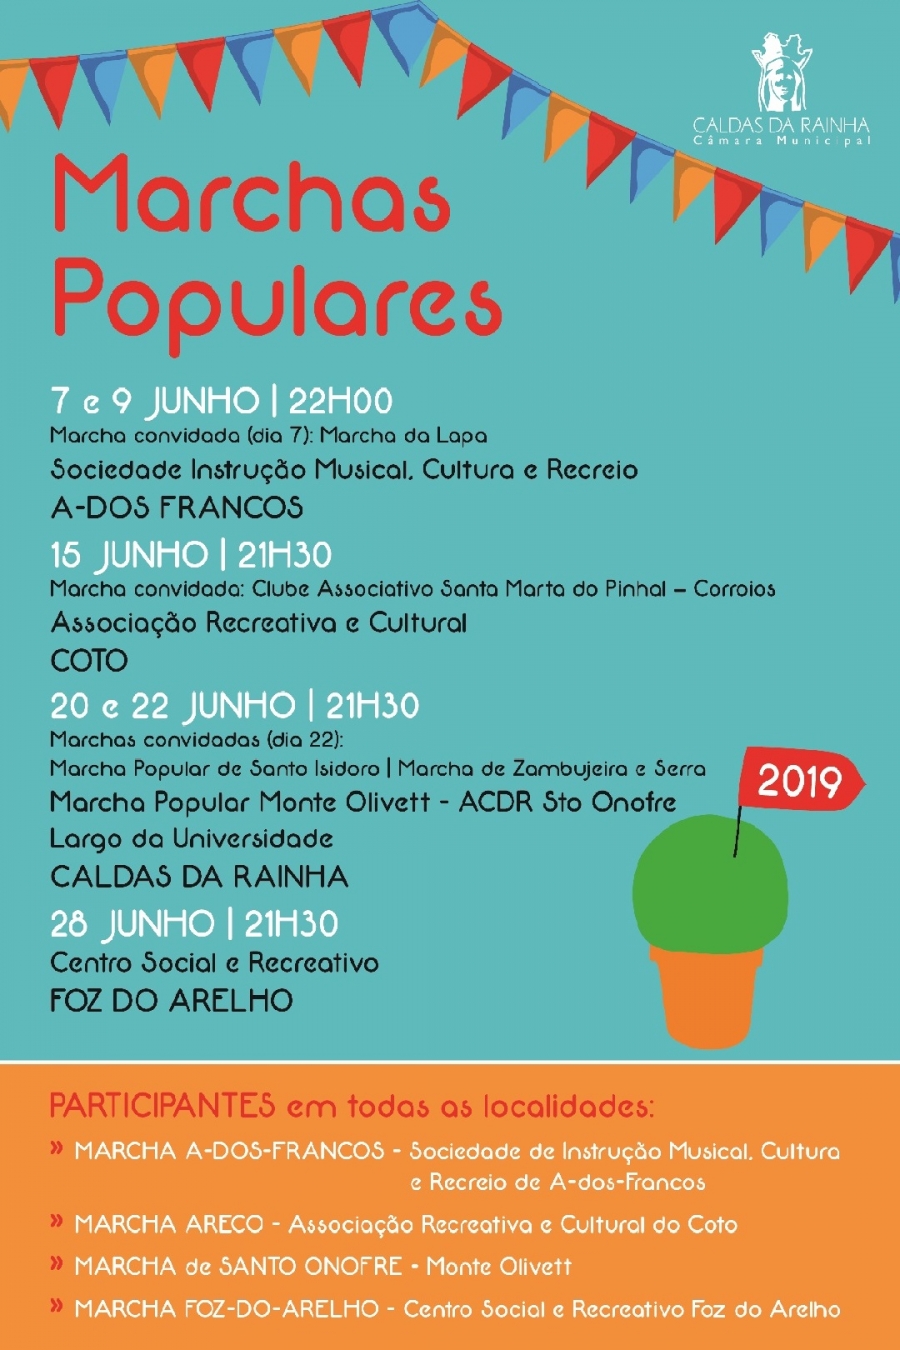 MARCHAS POPULARES